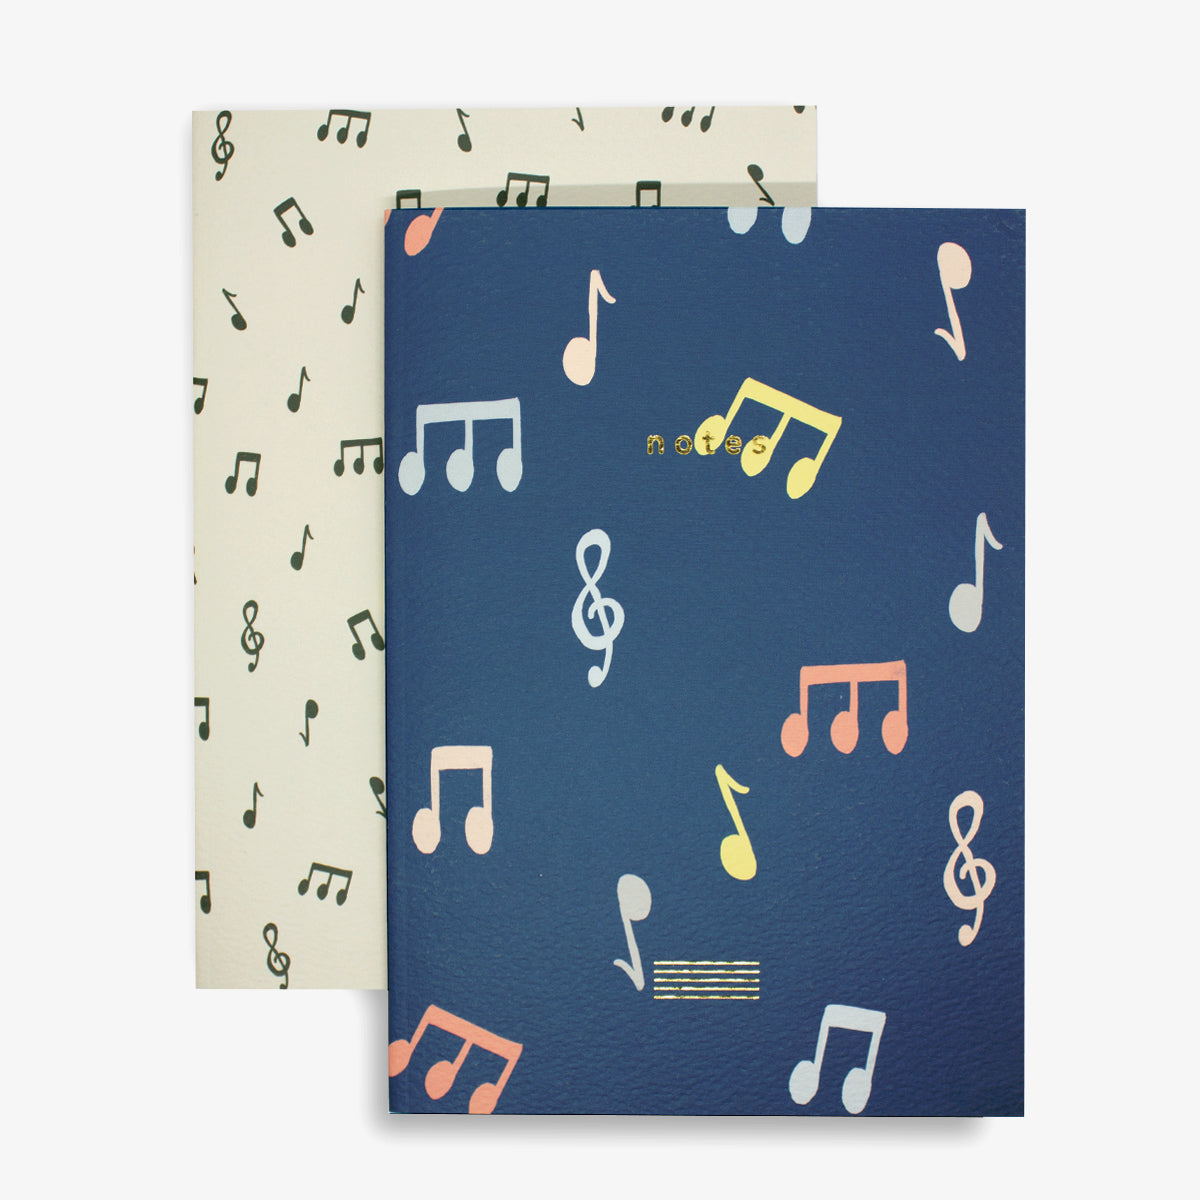 Notes Notebook Set of 2 - Ruled & Blank